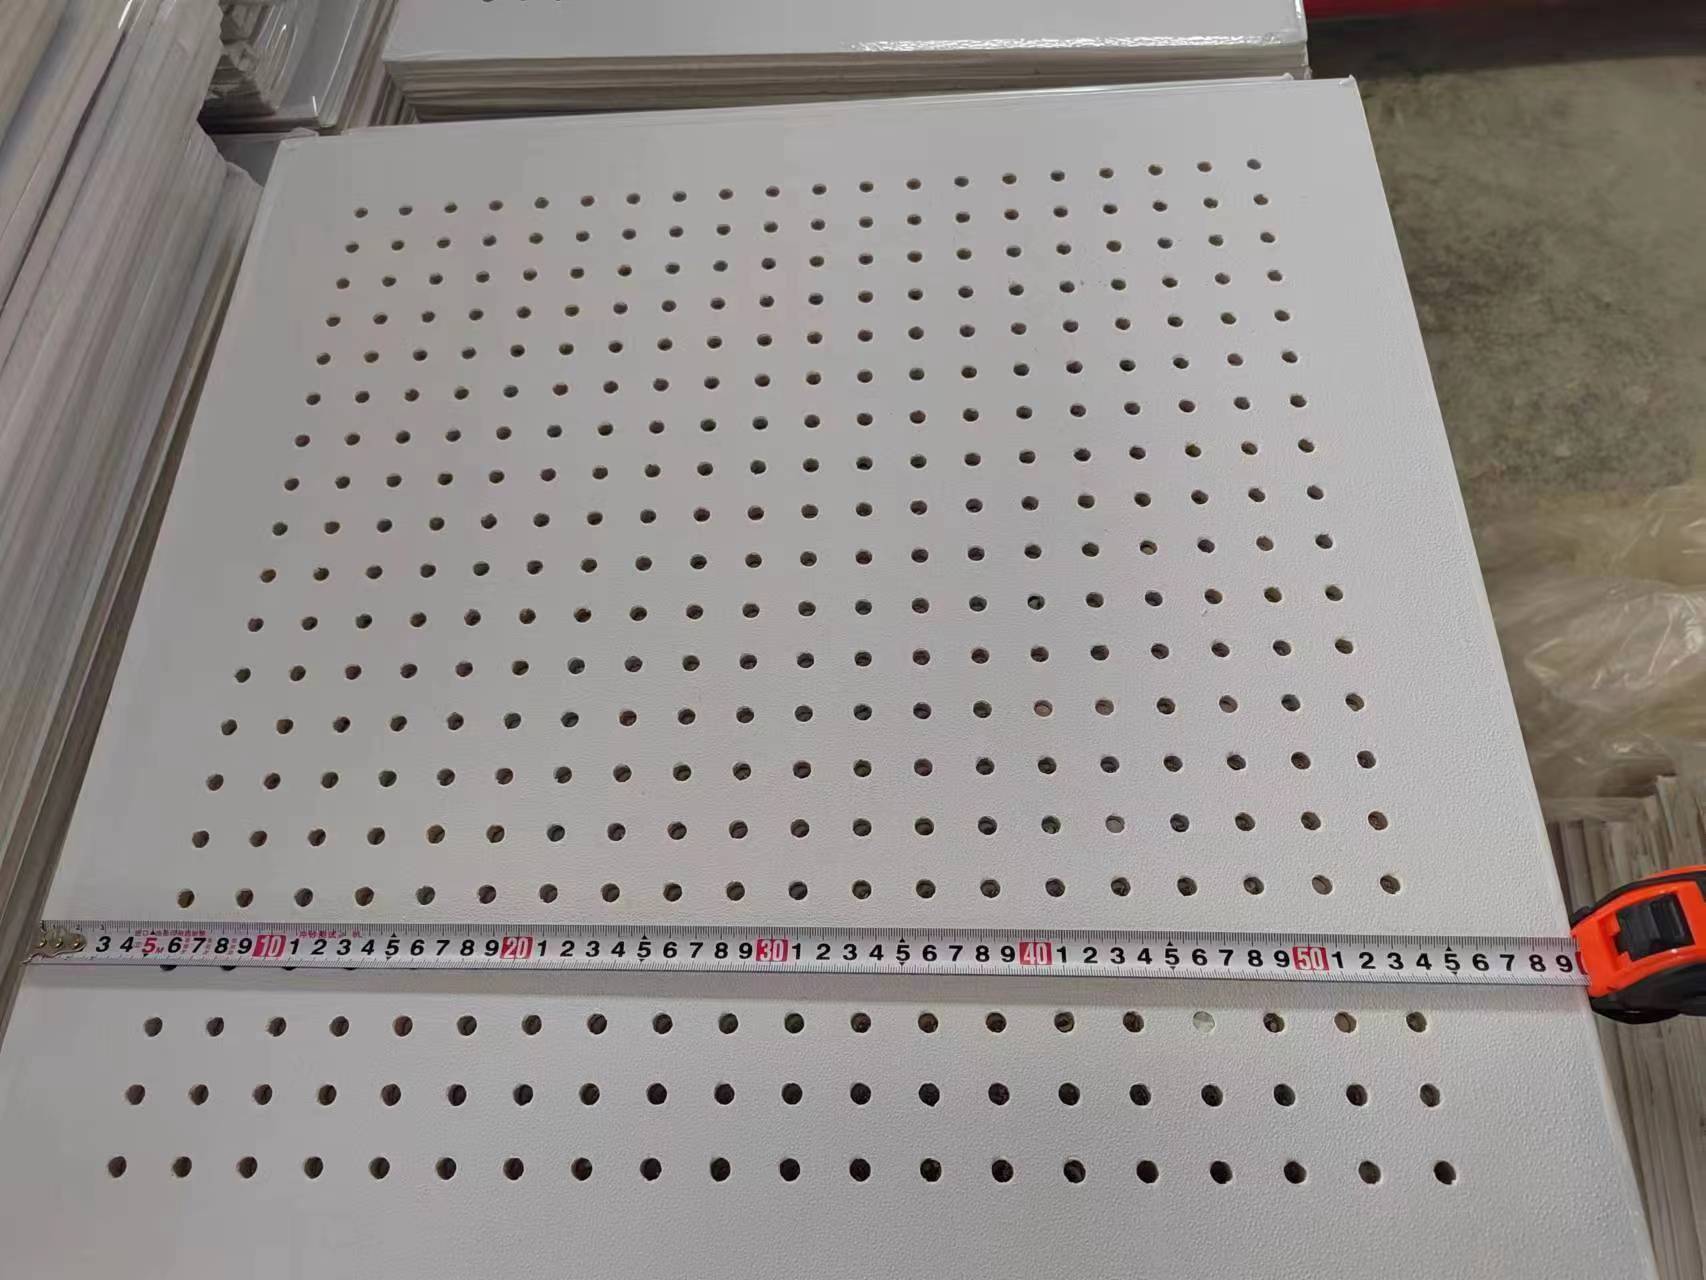 Perforated PVC Gypsum Ceiling Tile